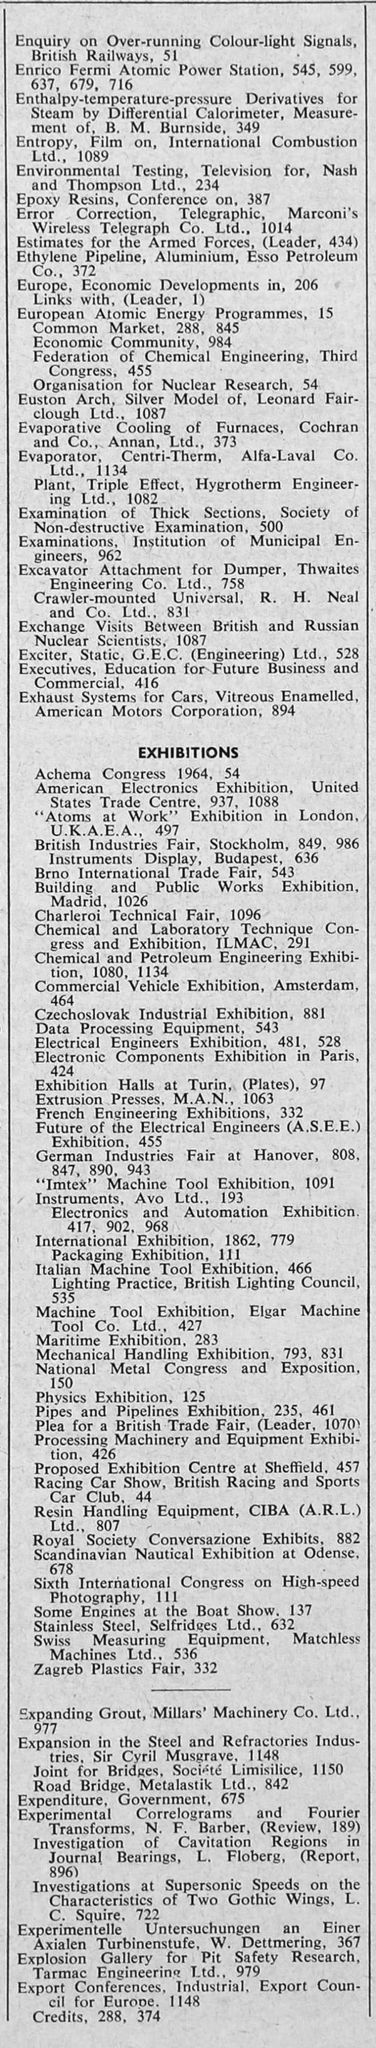 Inventions Of the Industrial Revolution Worksheet as Well as the Engineer 1962 Jan Jun Index Sections 2 and 3